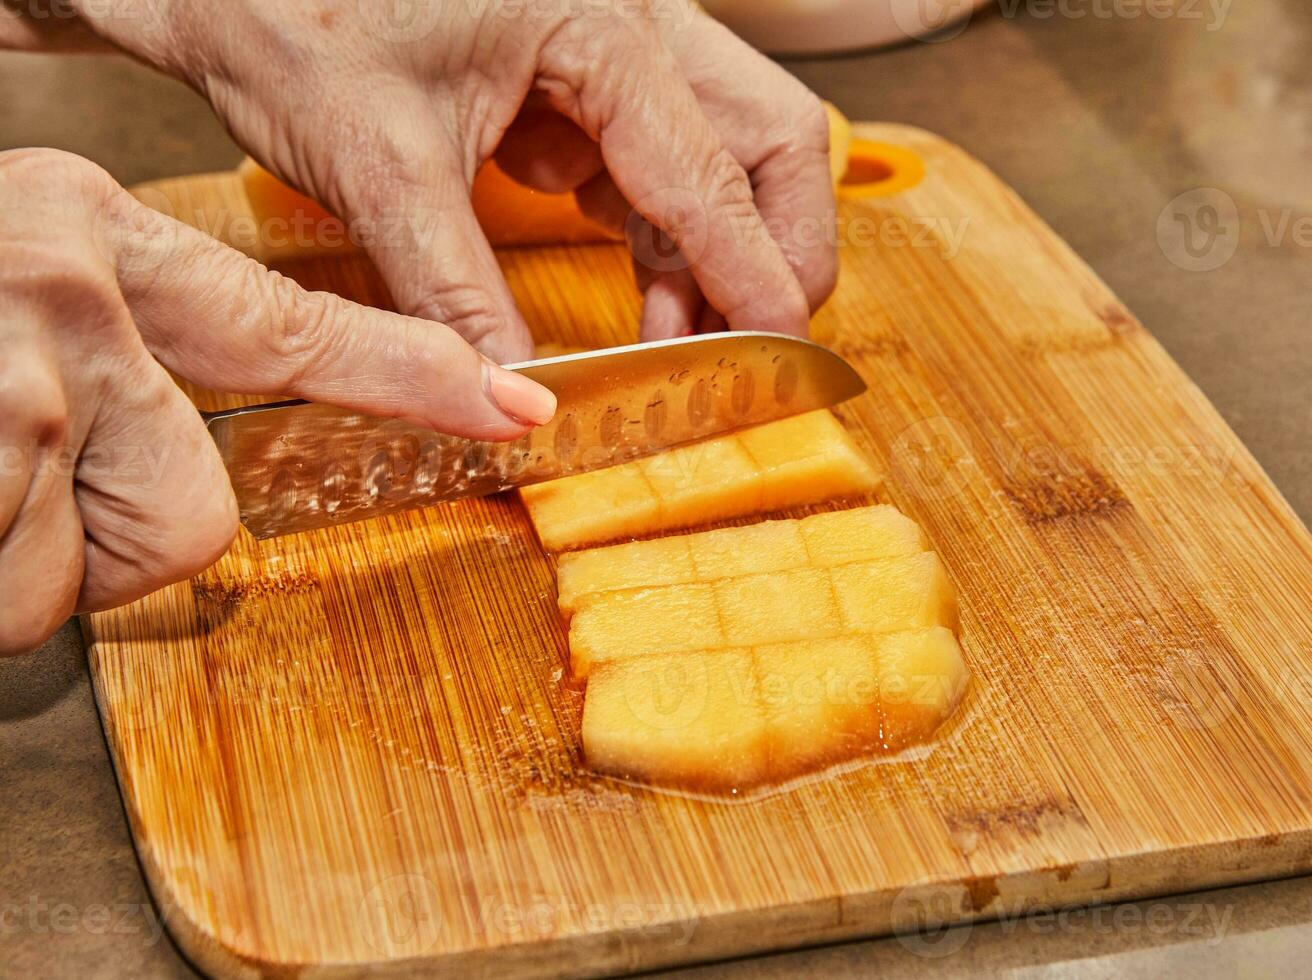 Chef cuts melon into cubes on wooden board in the kitchen photo